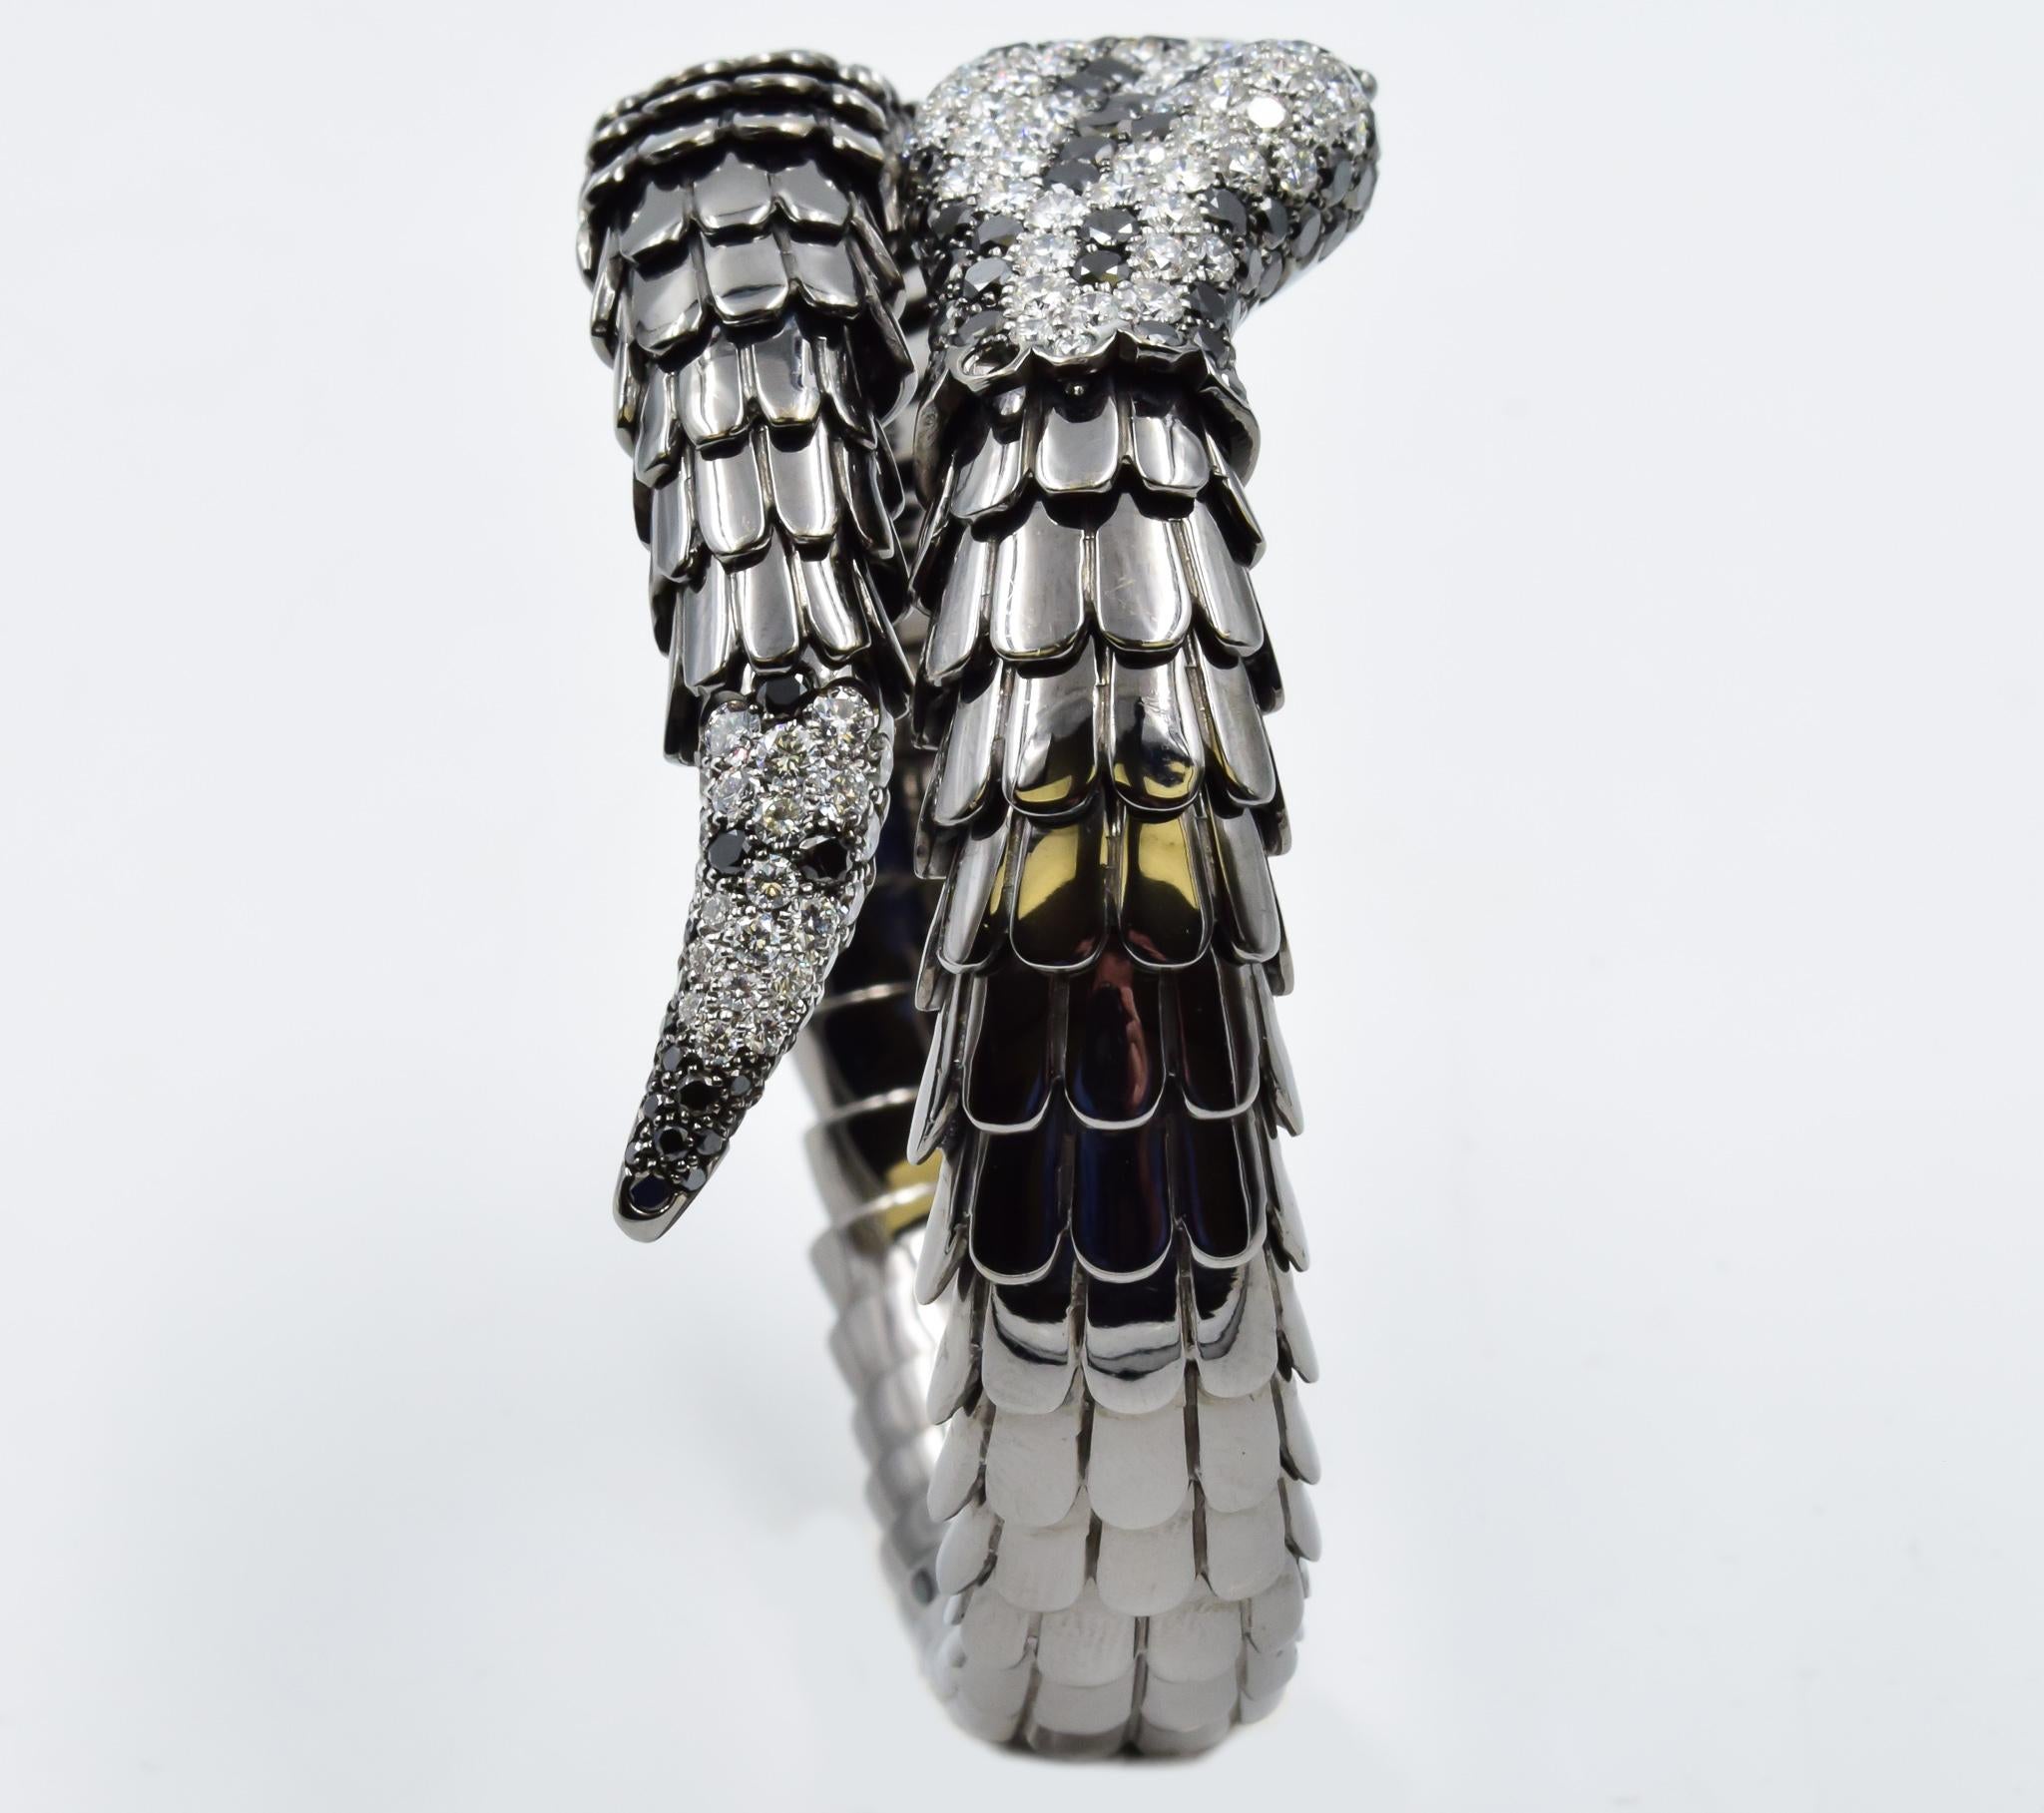 This Crivelli Snake bracelet is an incredibly designed piece with a flex open and close feature.  The quality of this piece is second to none and you will not be able to find a similarly crafted quality piece for this range in price.  Each link on